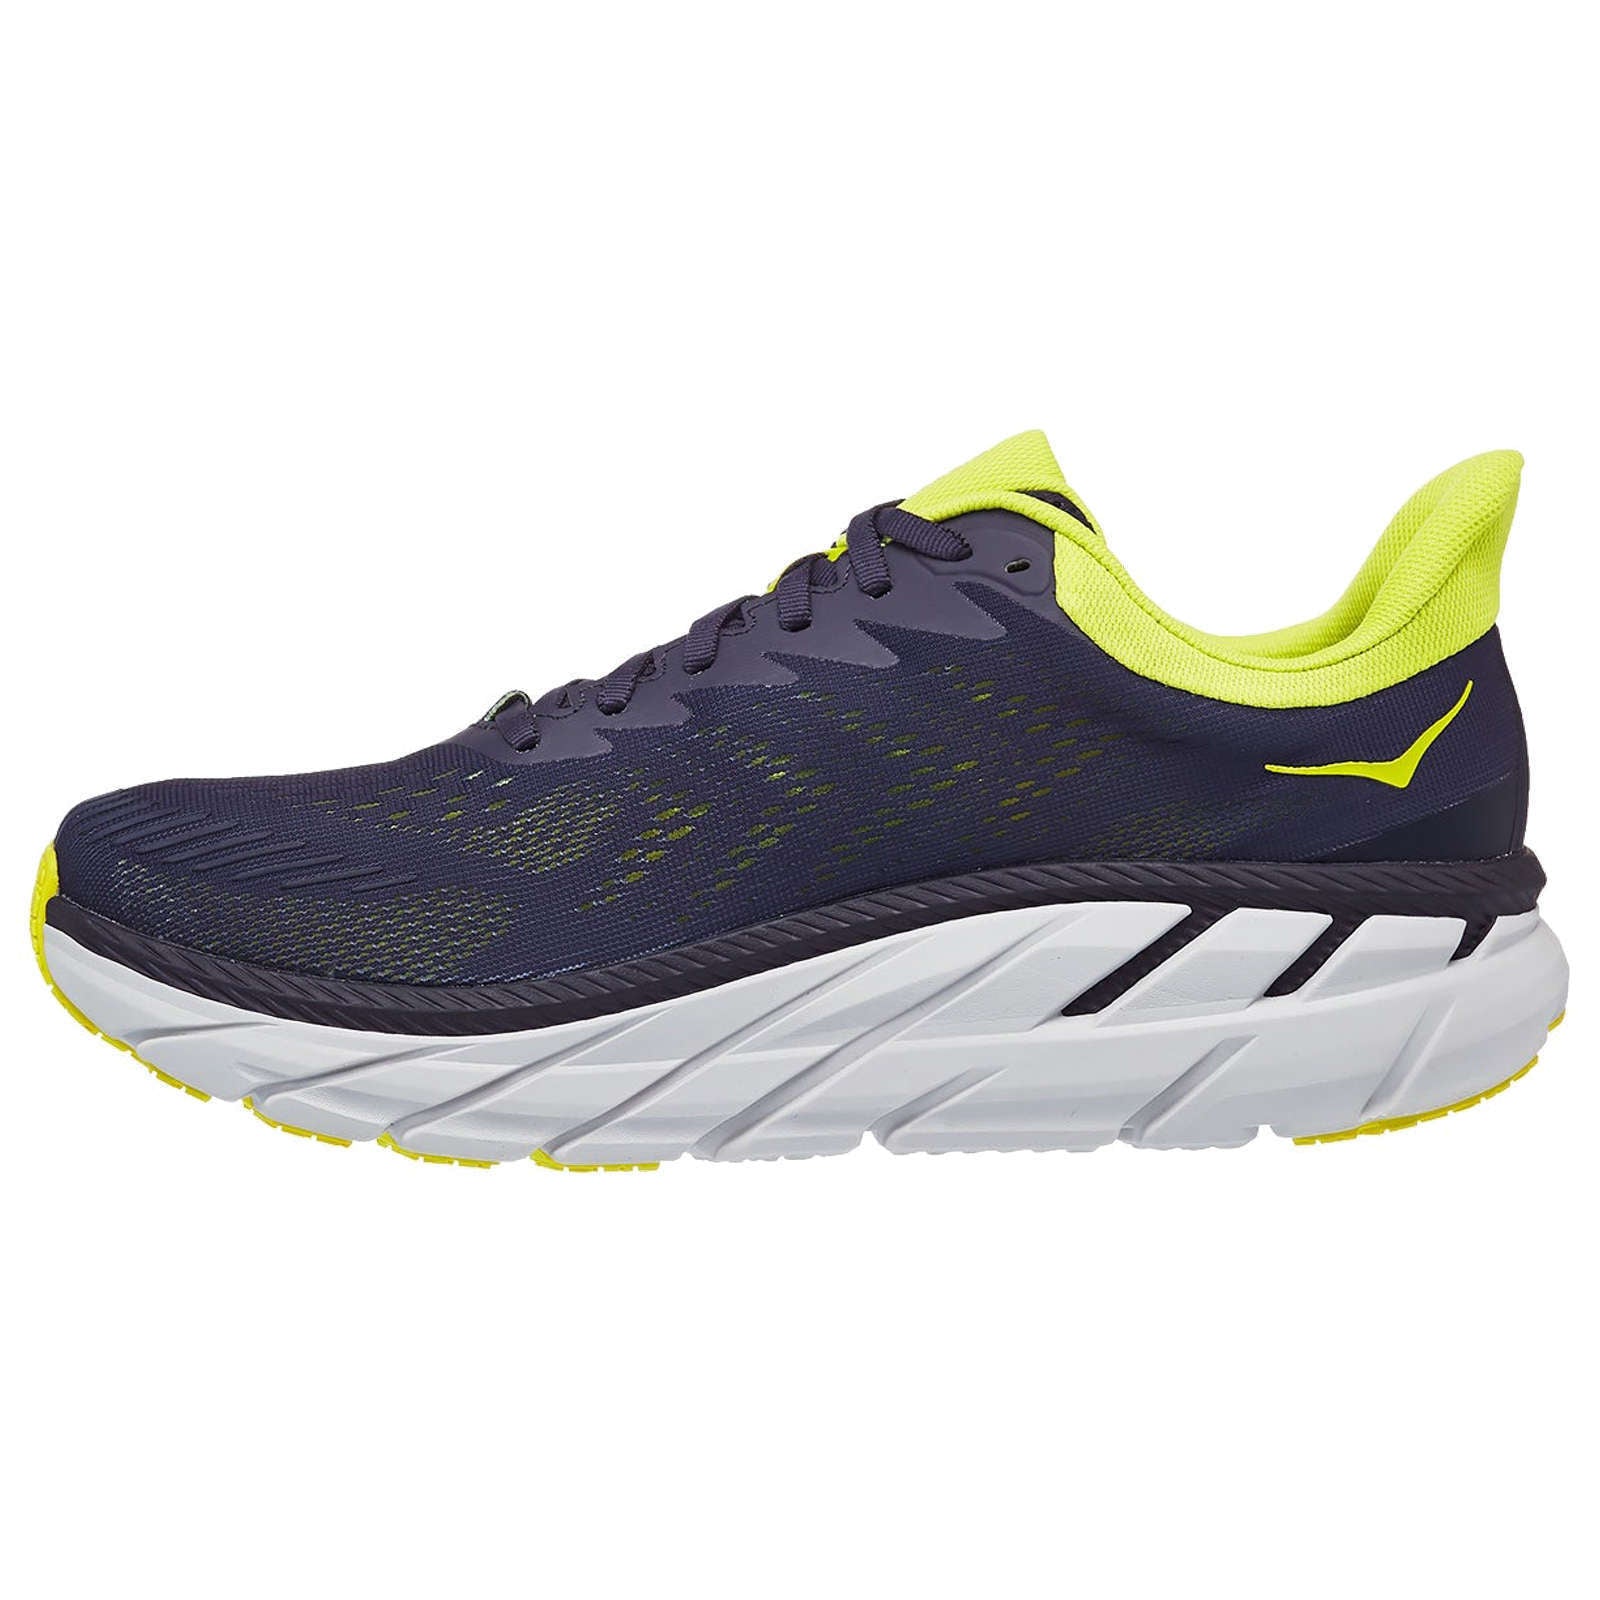 Hoka One One Clifton 7 Mesh Men's Low-Top Road Running Trainers#color_odyssey grey evening primrose